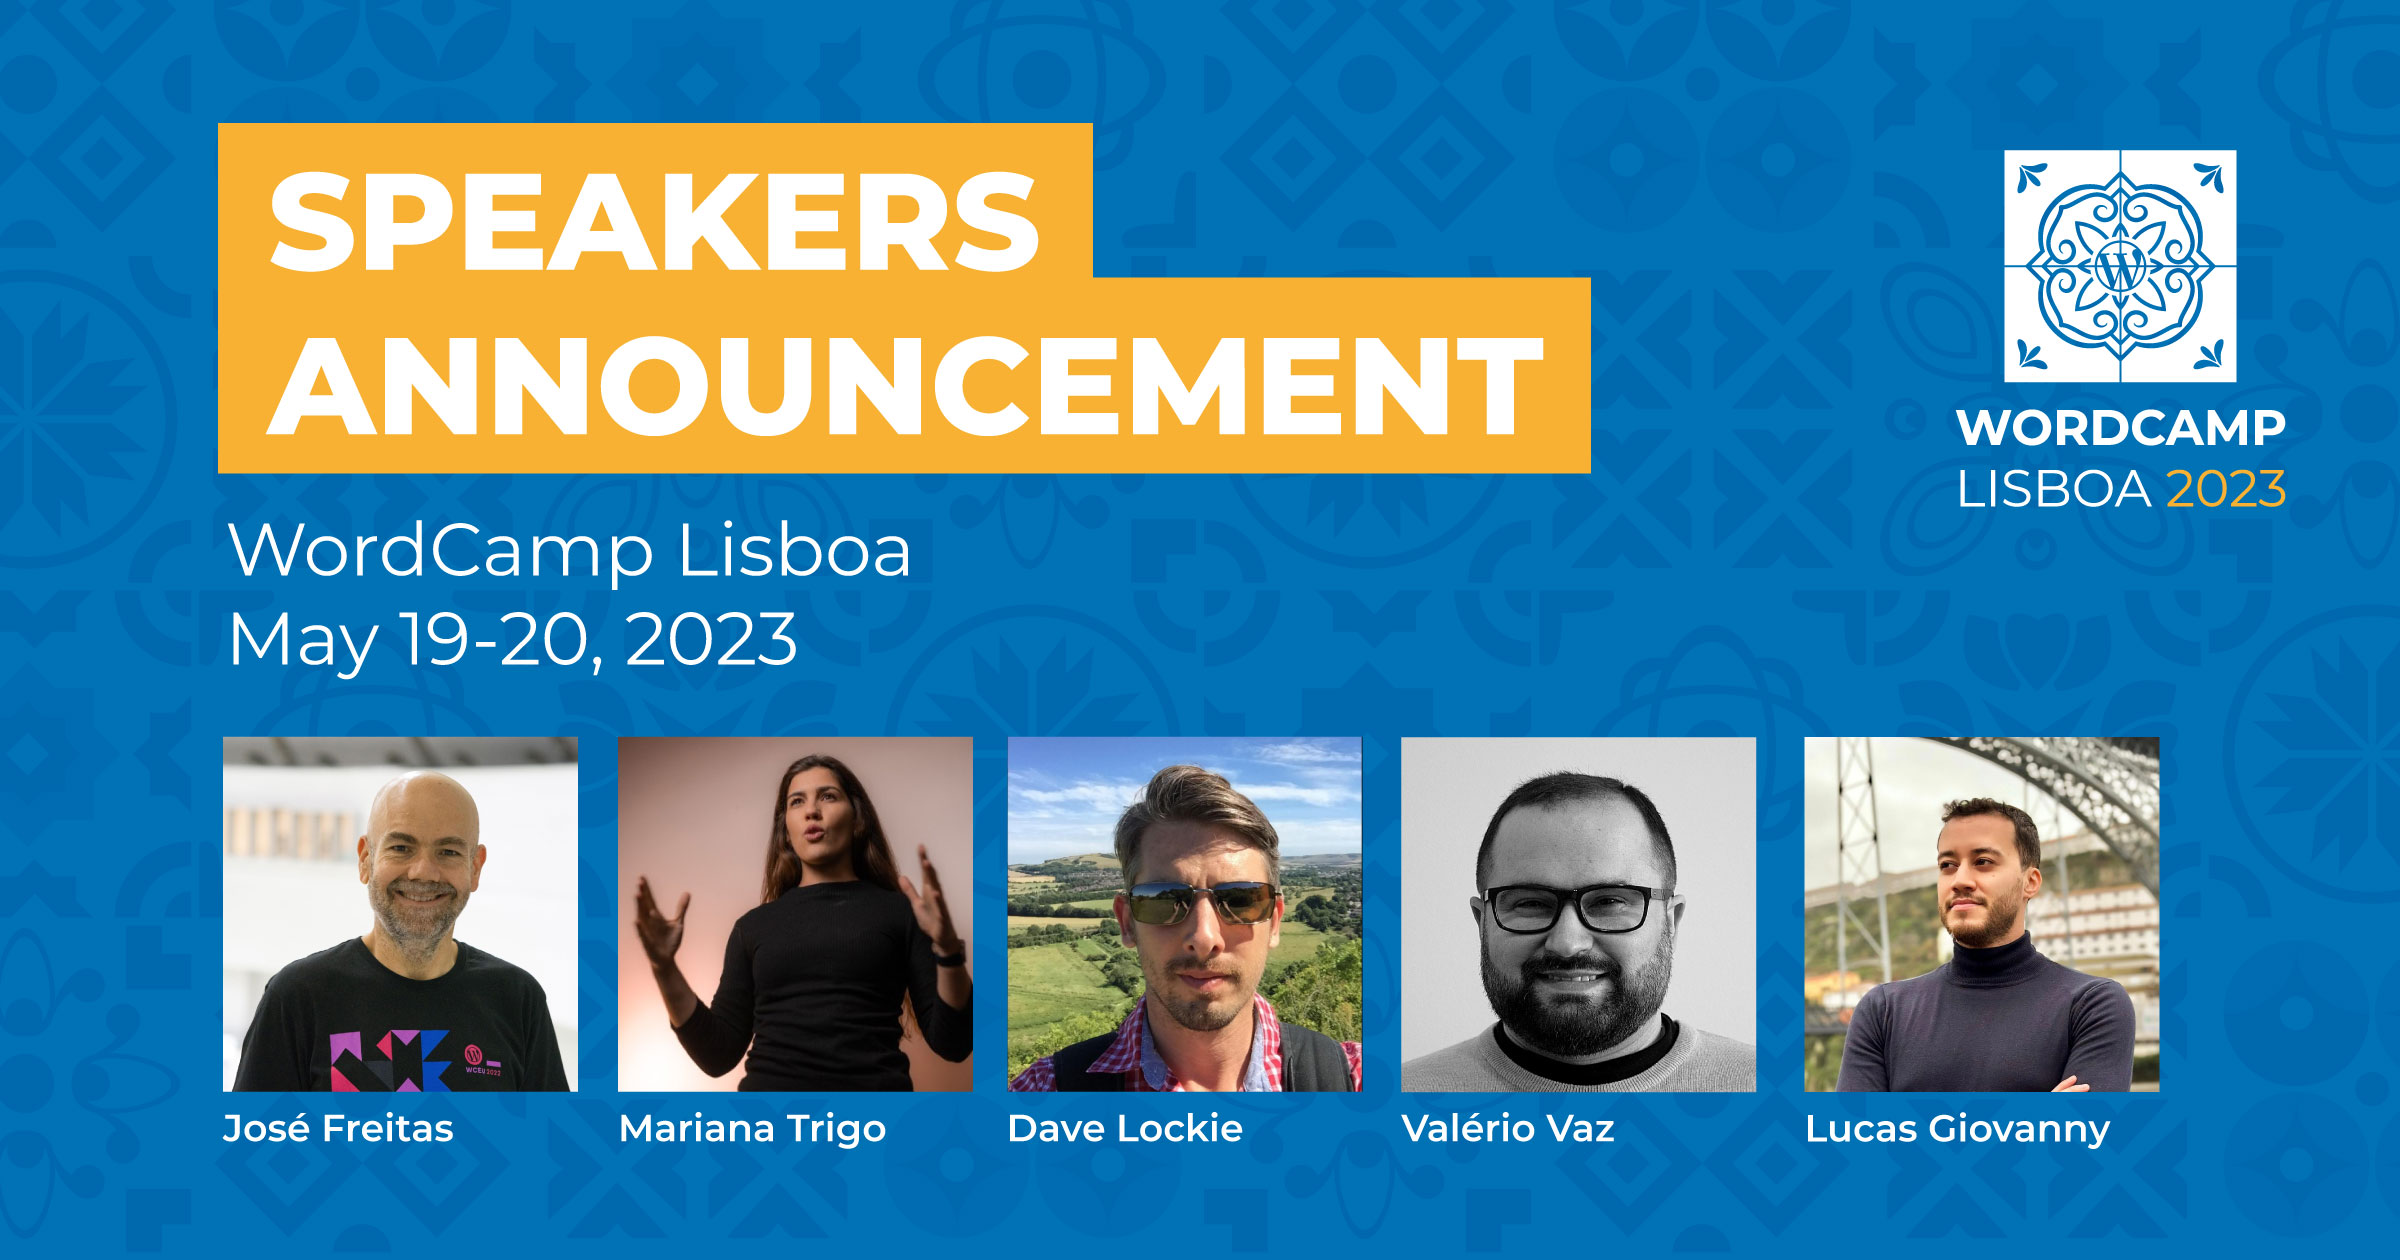 Second batch of speakers announced